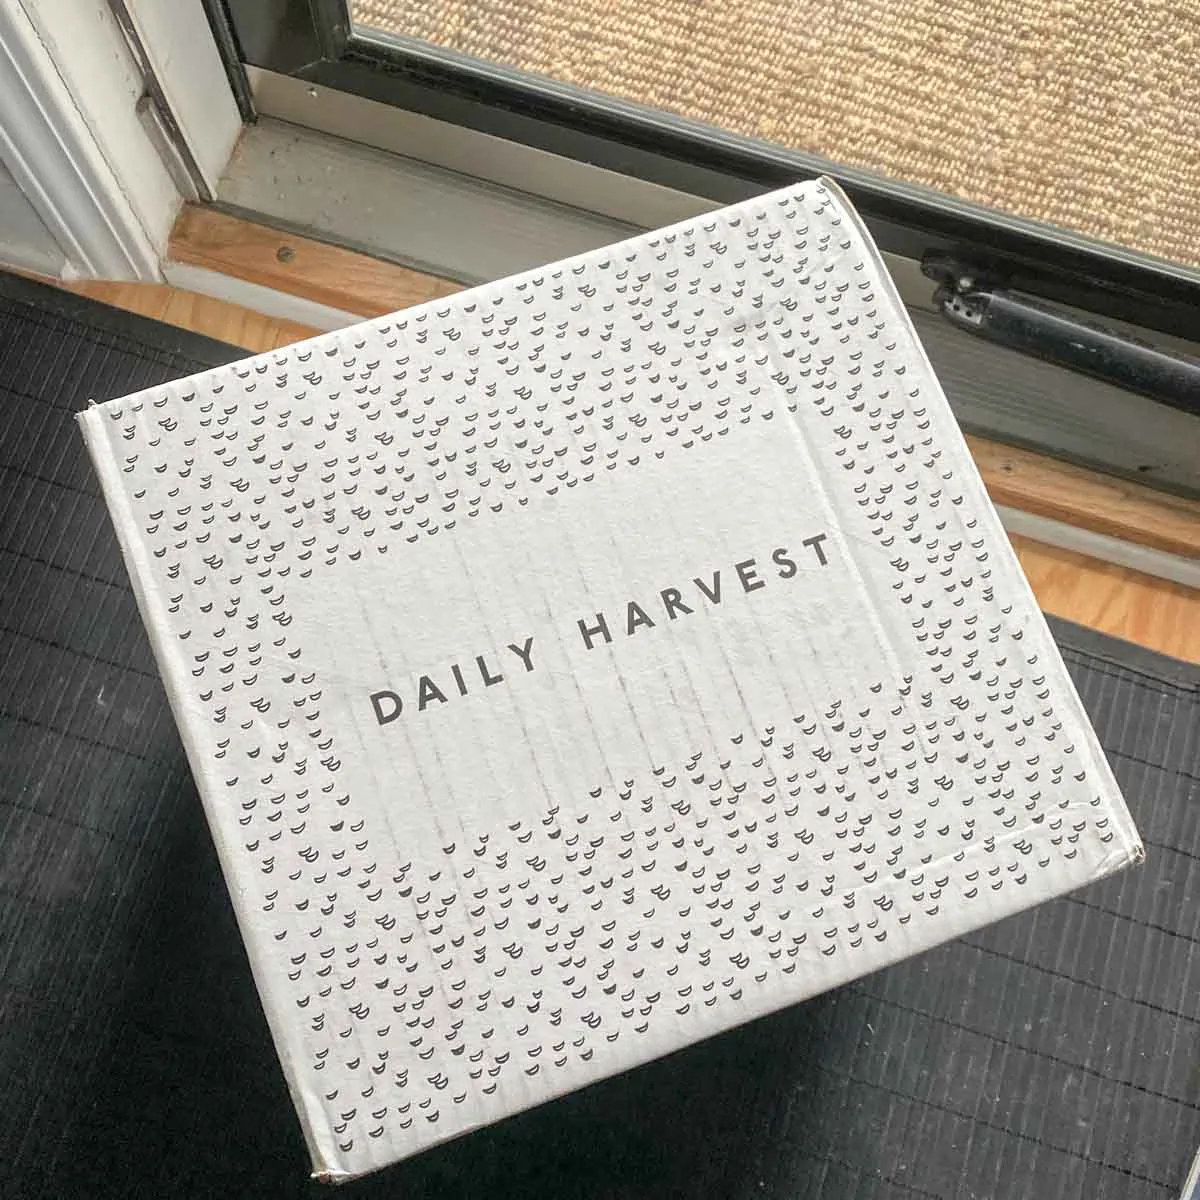 Daily Harvest delivery box